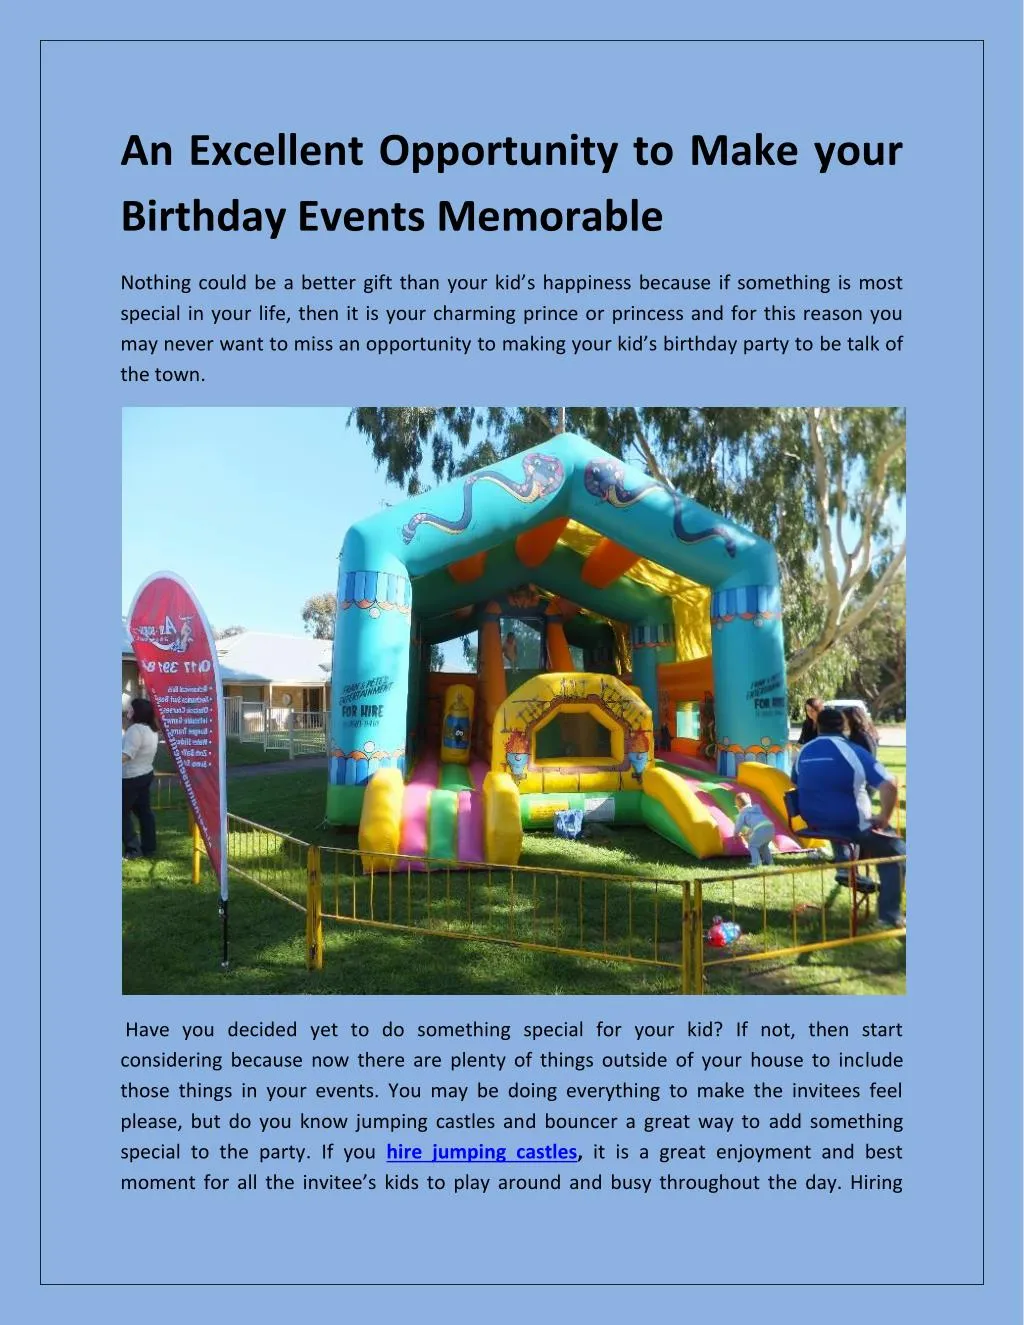 an excellent opportunity to make your birthday